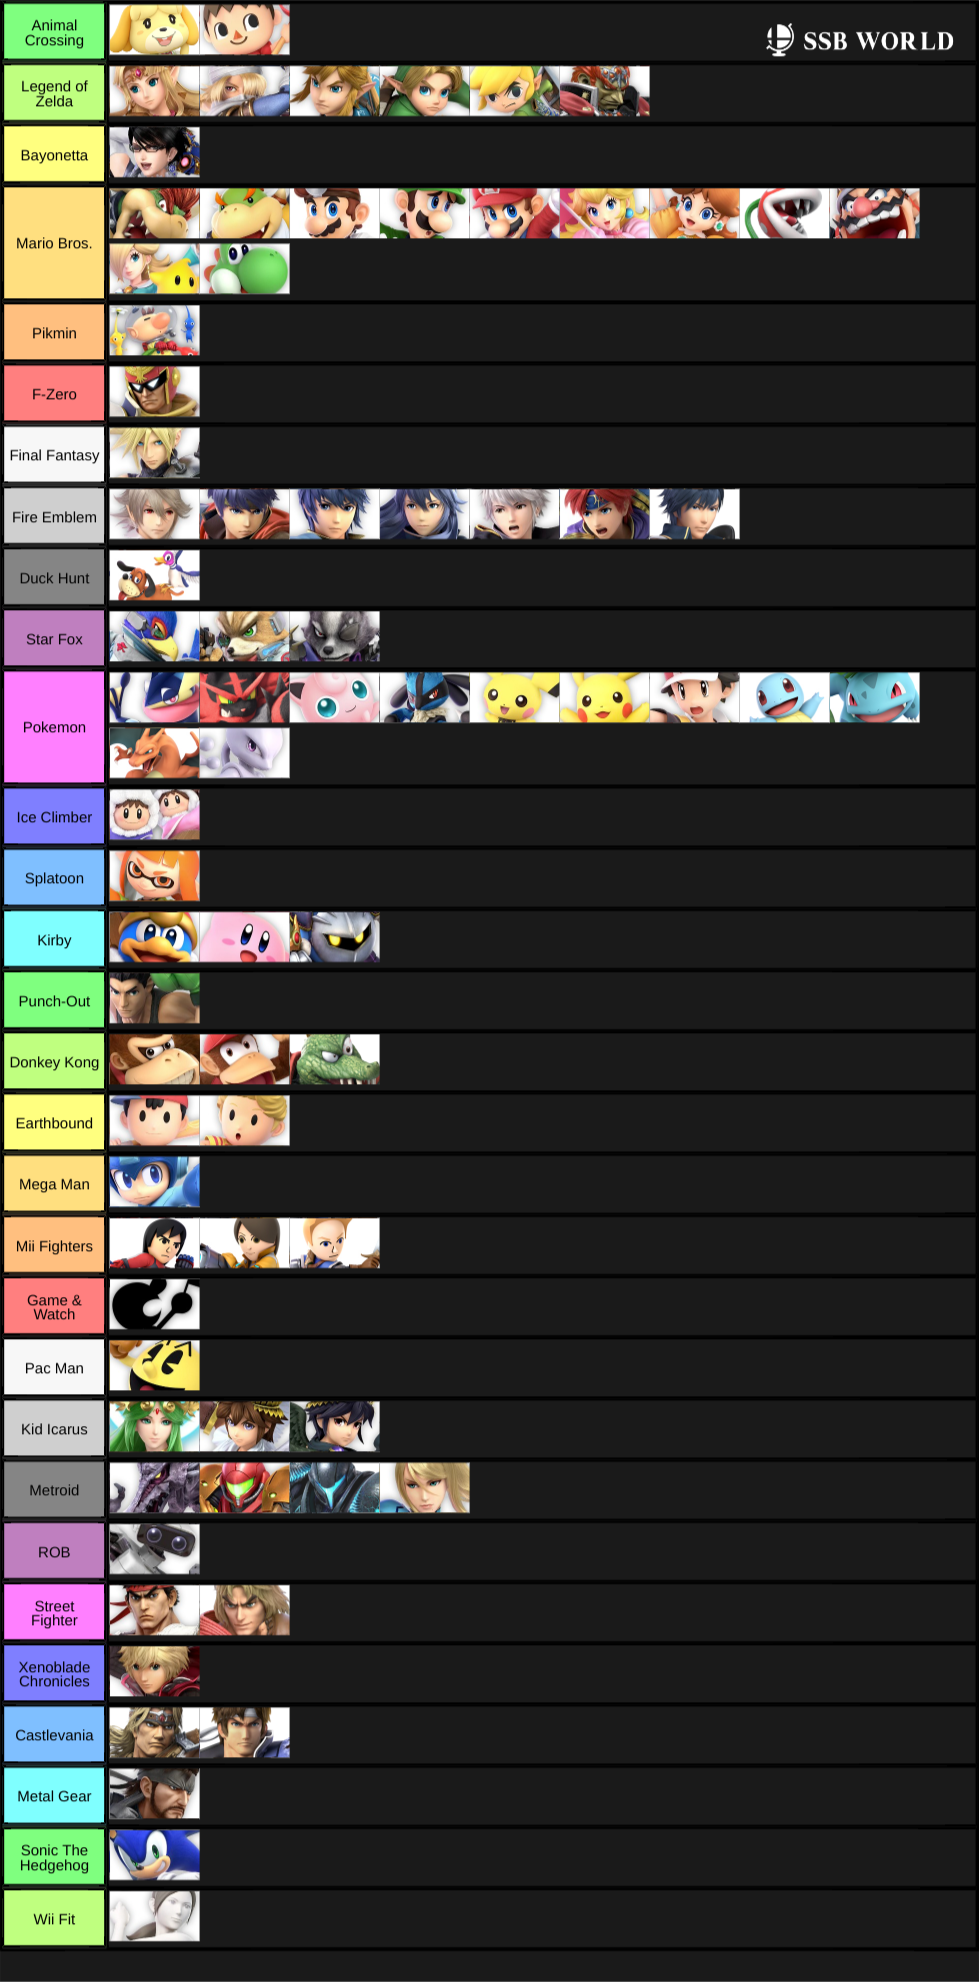 Tier List by Franchise